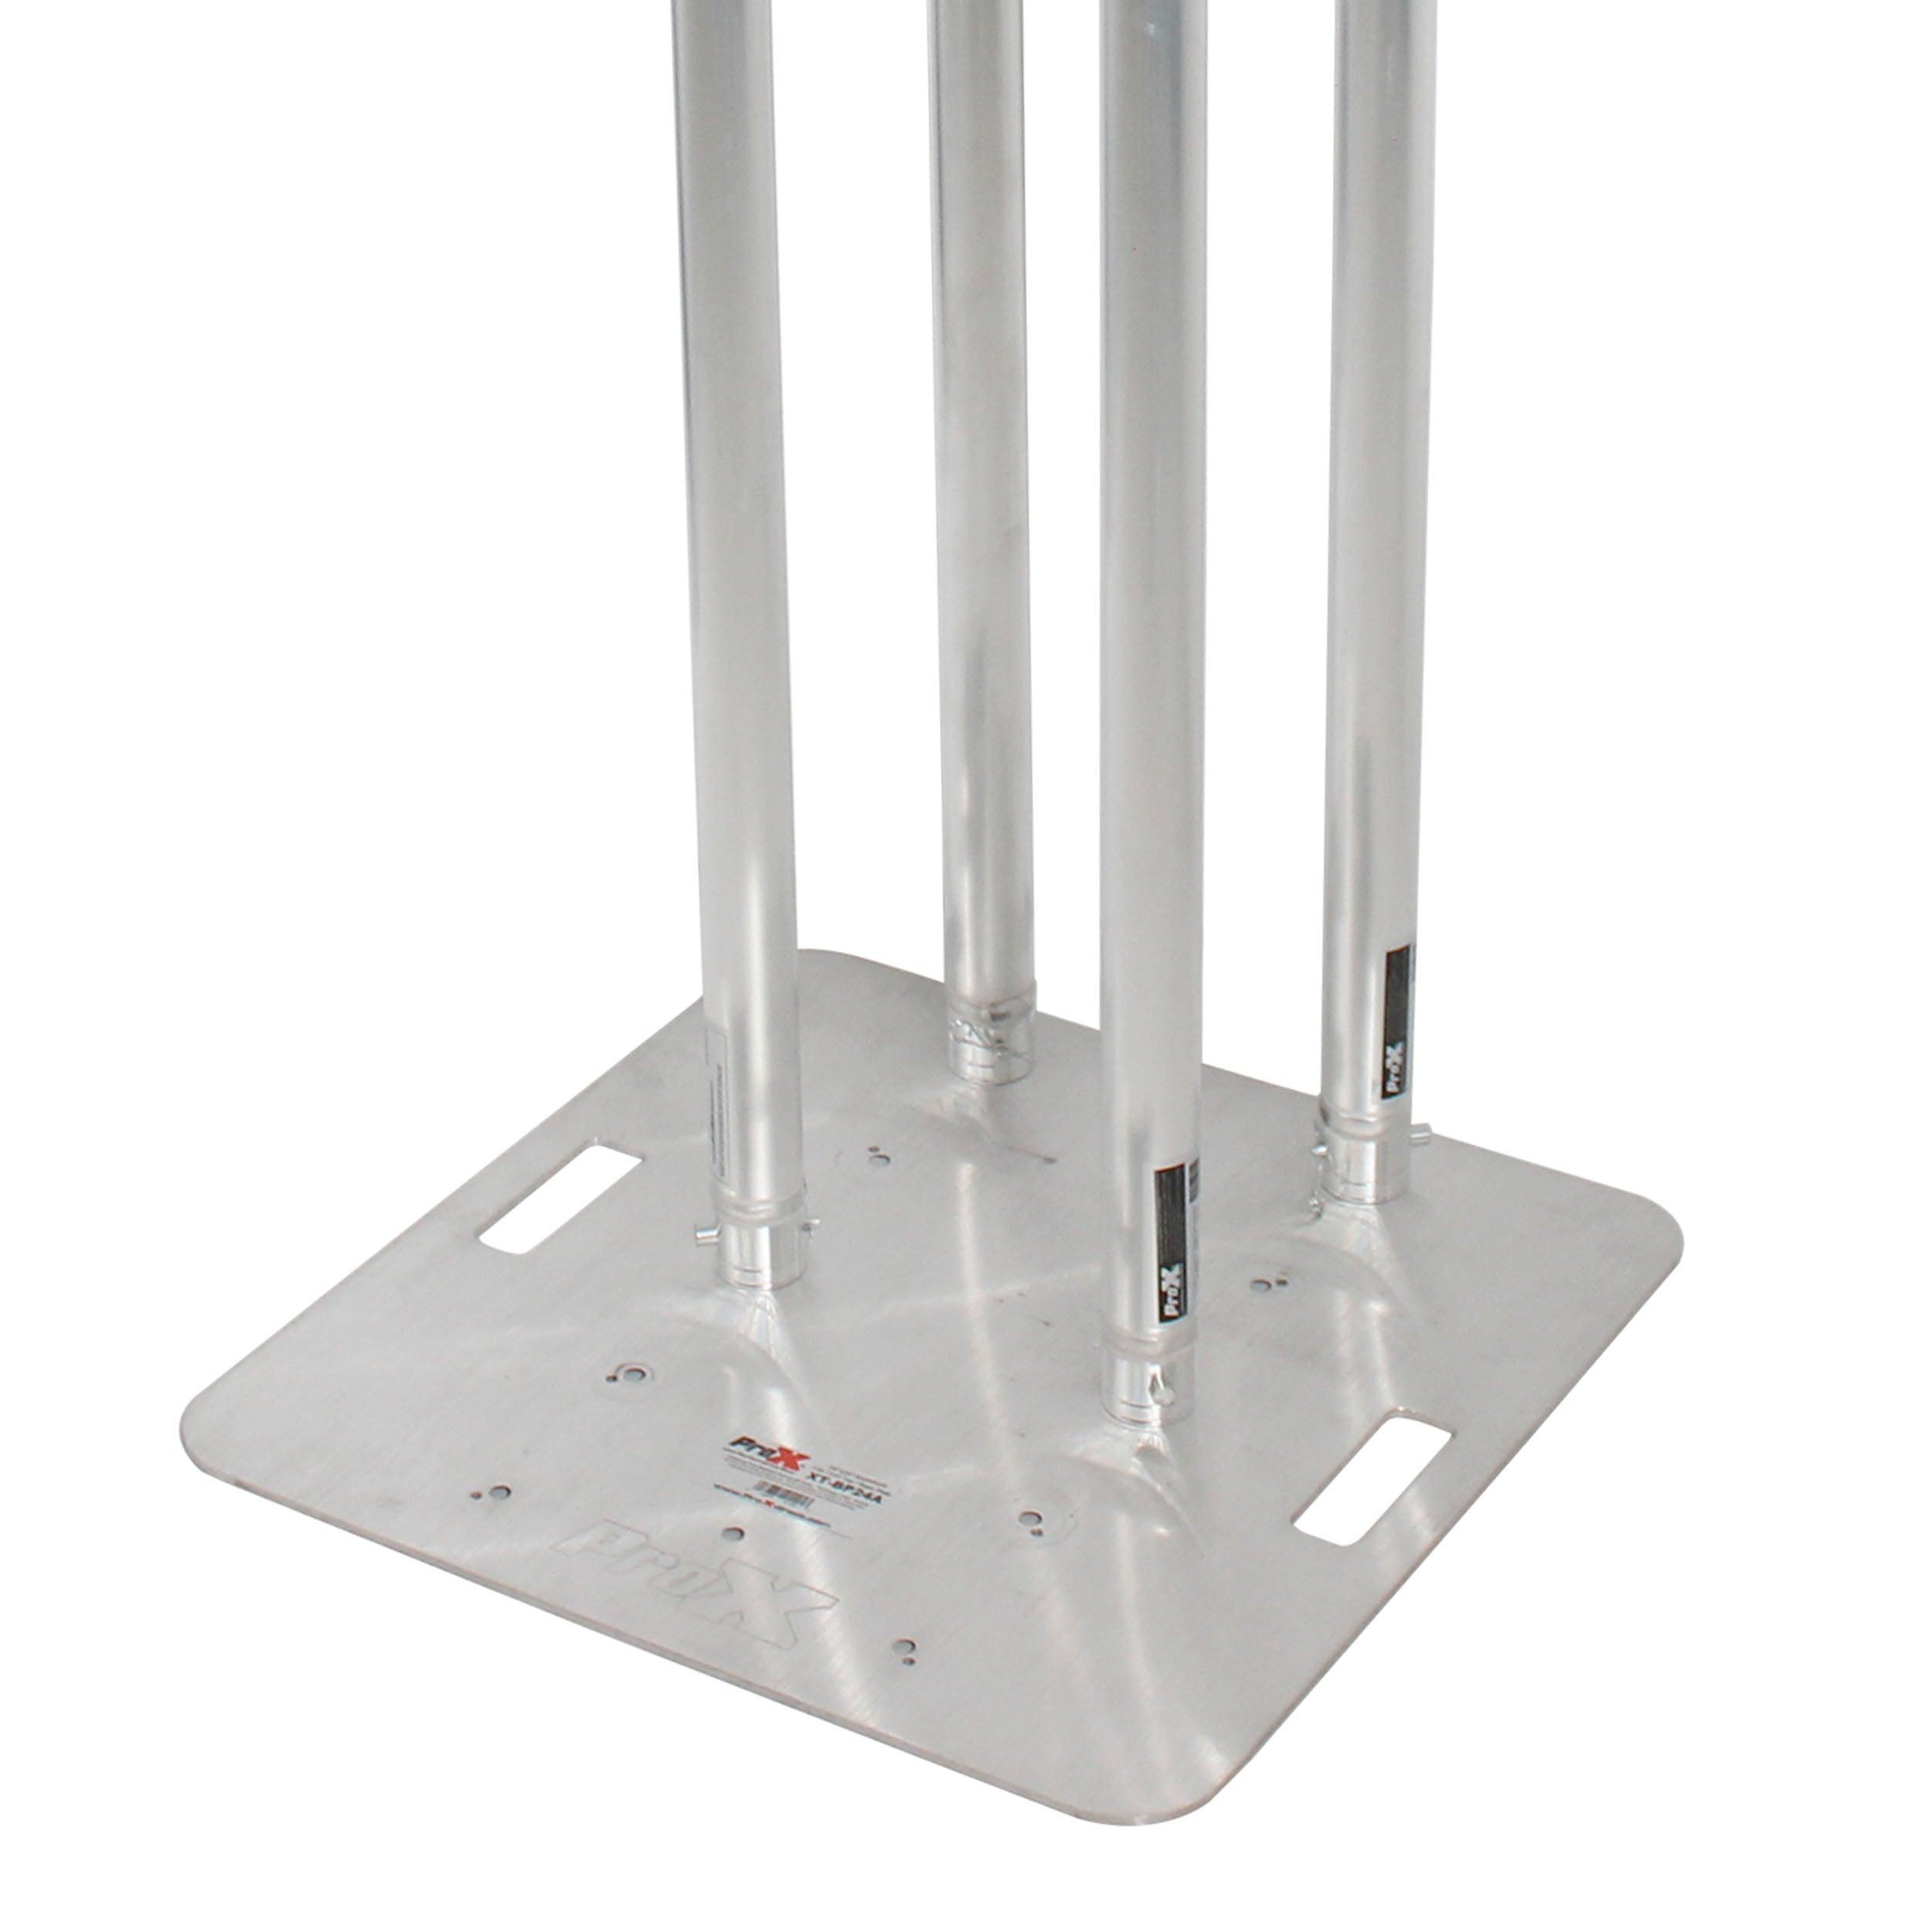 Pro X 4.92ft Totem Package Includes a 12in Top Plate, 24in Base Plate and Four 1.5m F31 Tubes W-White Scrim Cover XT-S4X492TOTEM